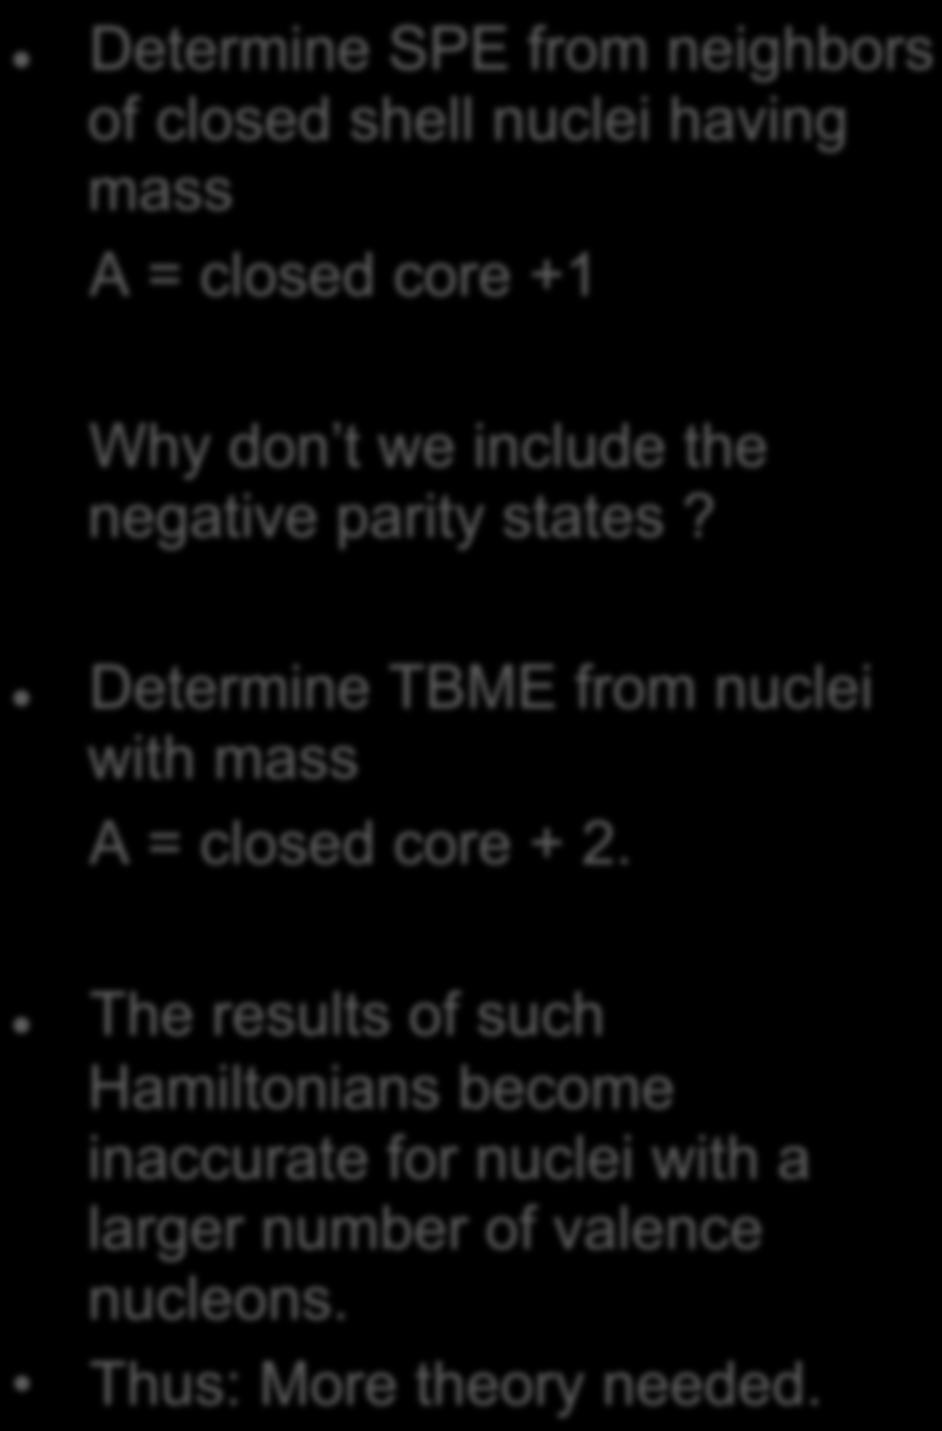 Empirical determination of SPE and TBME Determine SPE from neighbors of closed shell nuclei having mass A = closed core +1 Why don t we include the negative parity states?